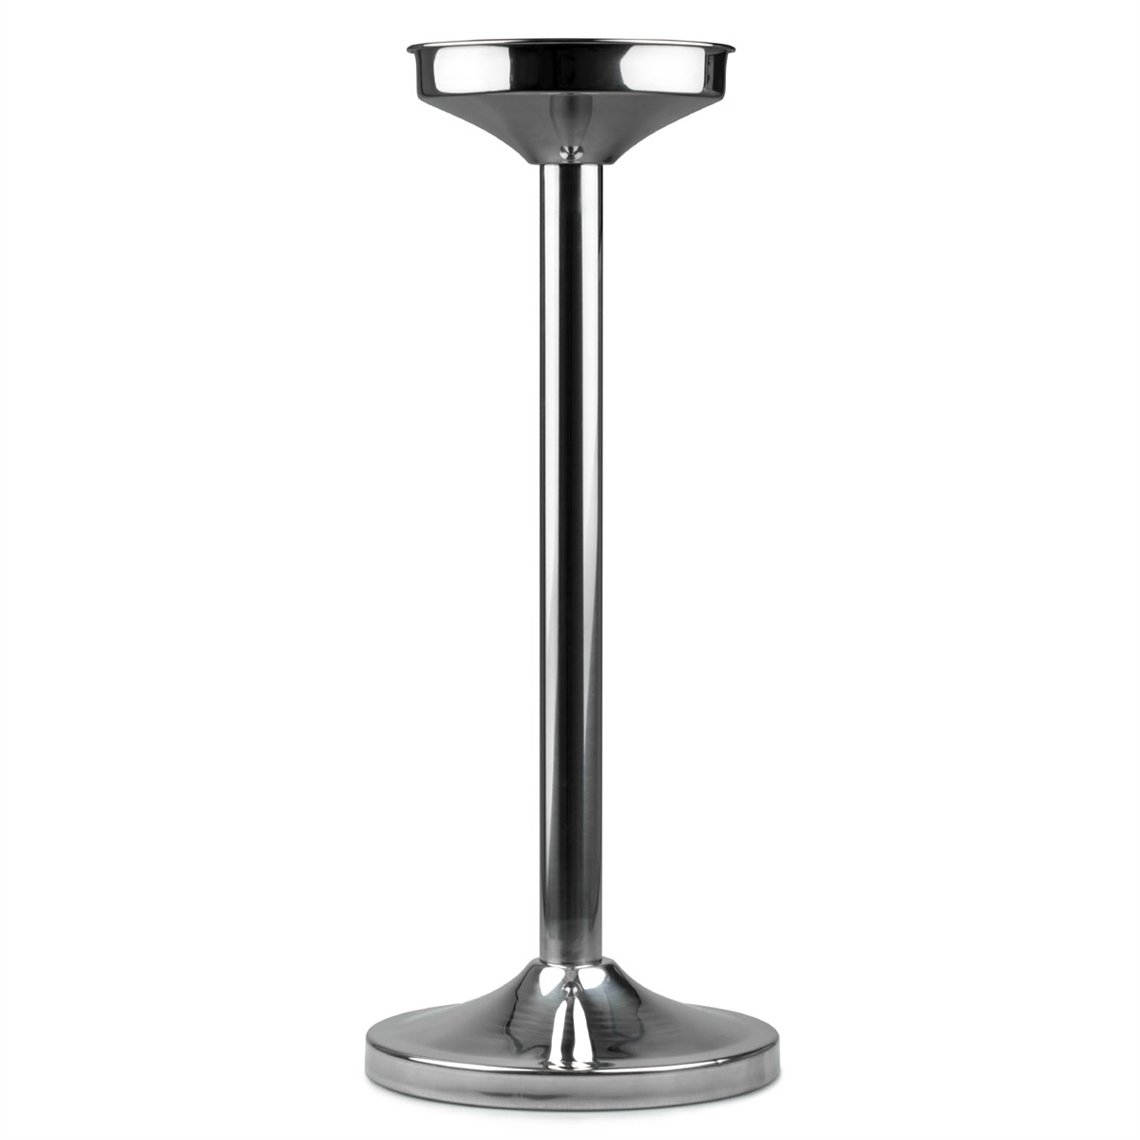 Elia Deluxe Wine & Champagne Bottle Cooler - Floor Standing, Round Base Stand